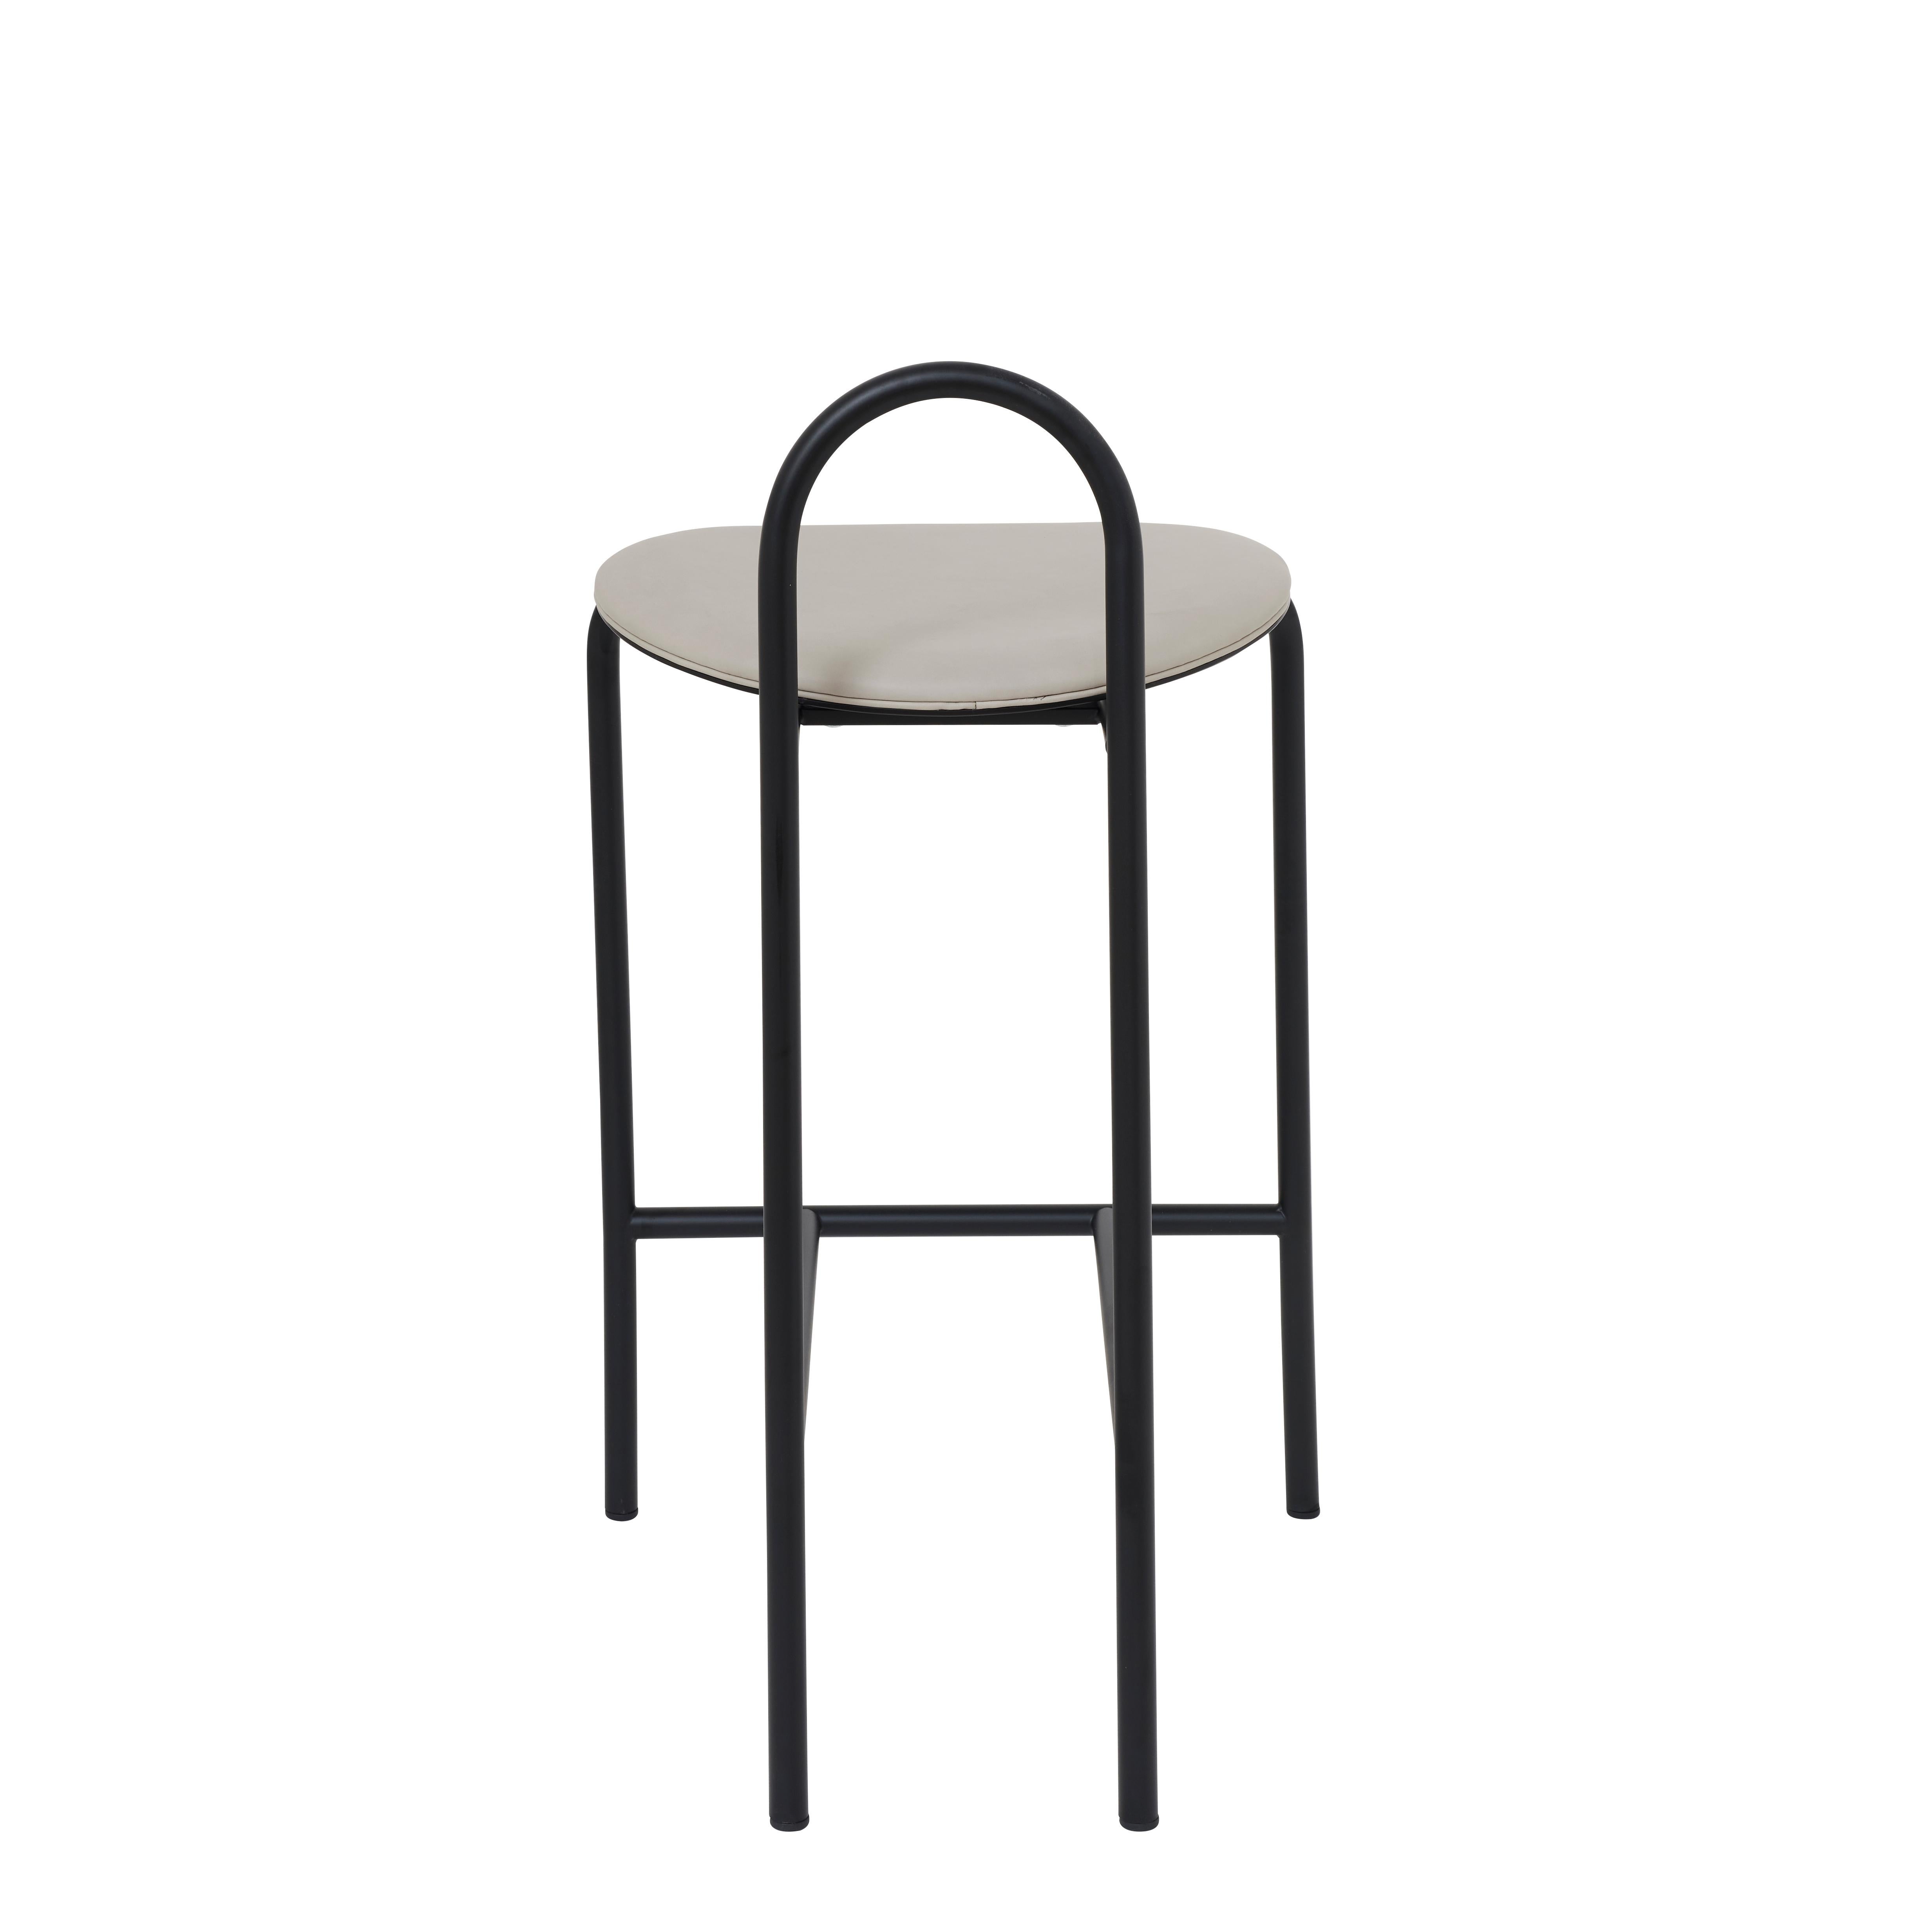 A natural extension to the popular Michelle chair, the Michelle stool continues to play on the visual application of the arc, creating a simple, striking and highly adaptable stool for any interior.

About this finishing:
Seat: Edinburgh mist